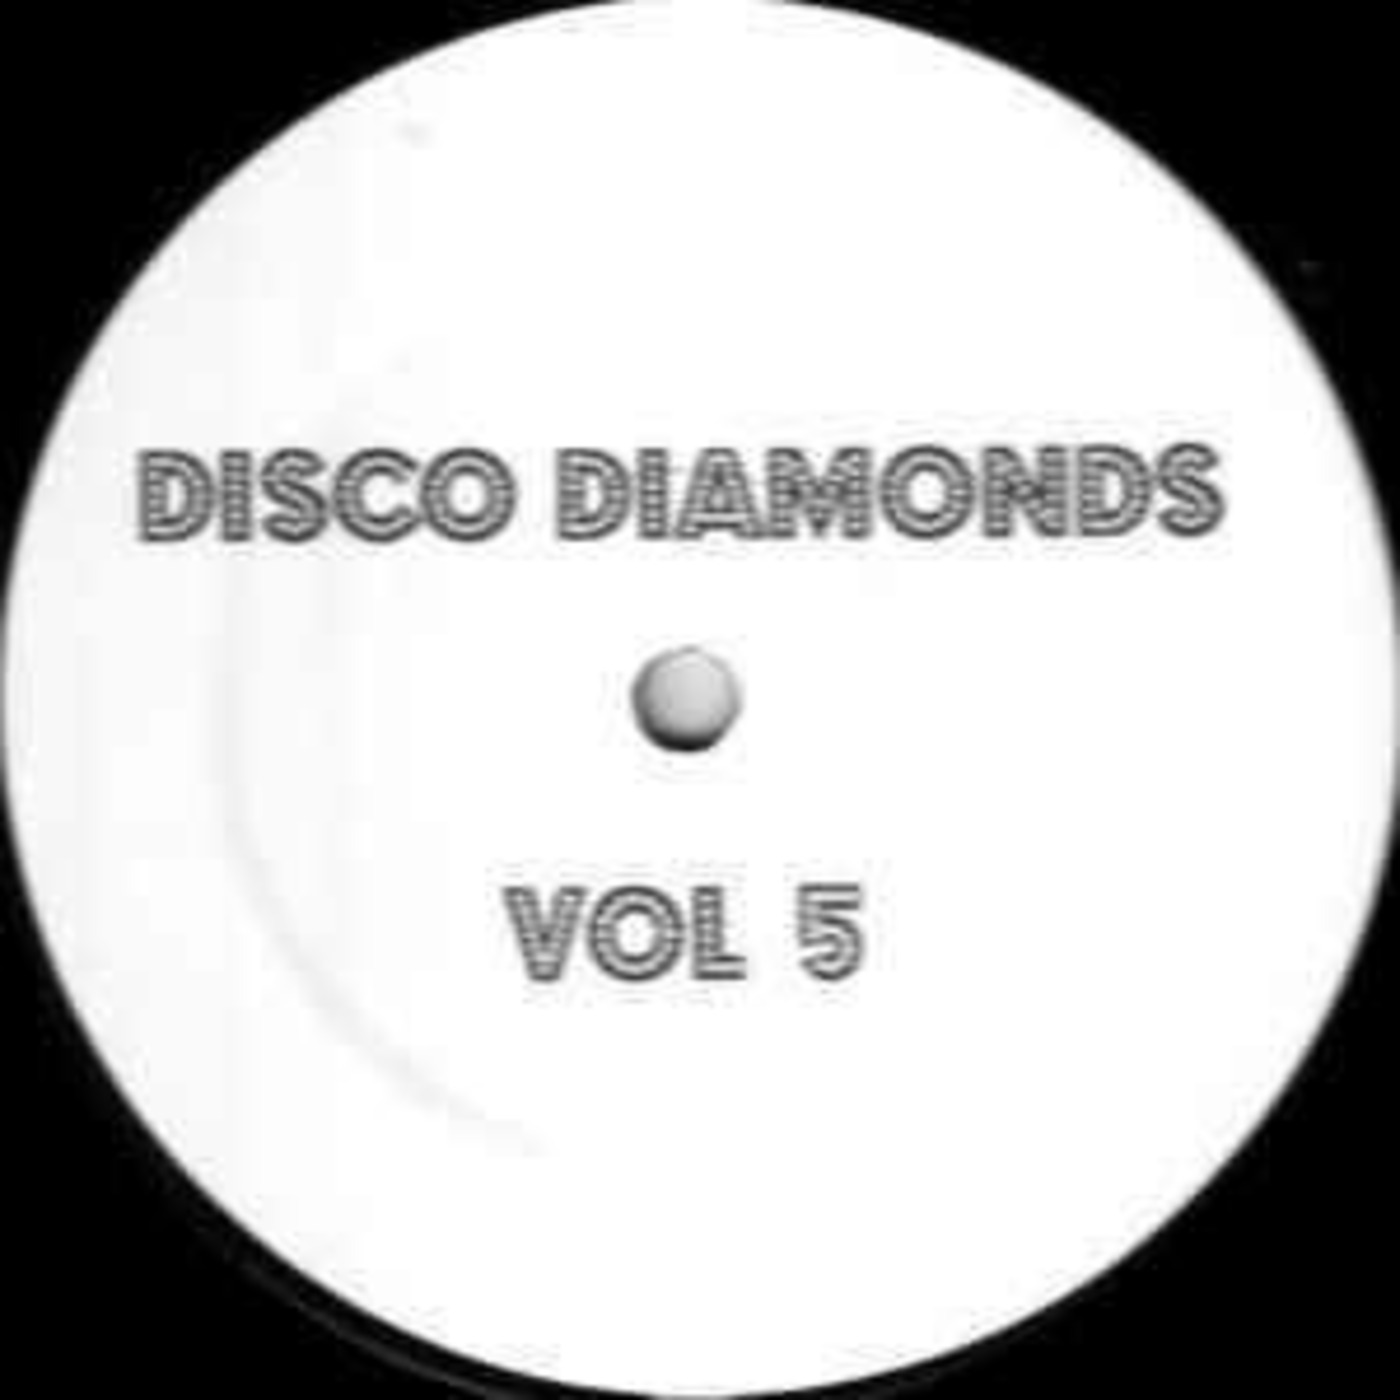 Disco Diamonds Vol. 5 - The More I Get, The More I Want (Loopy ReVamp)